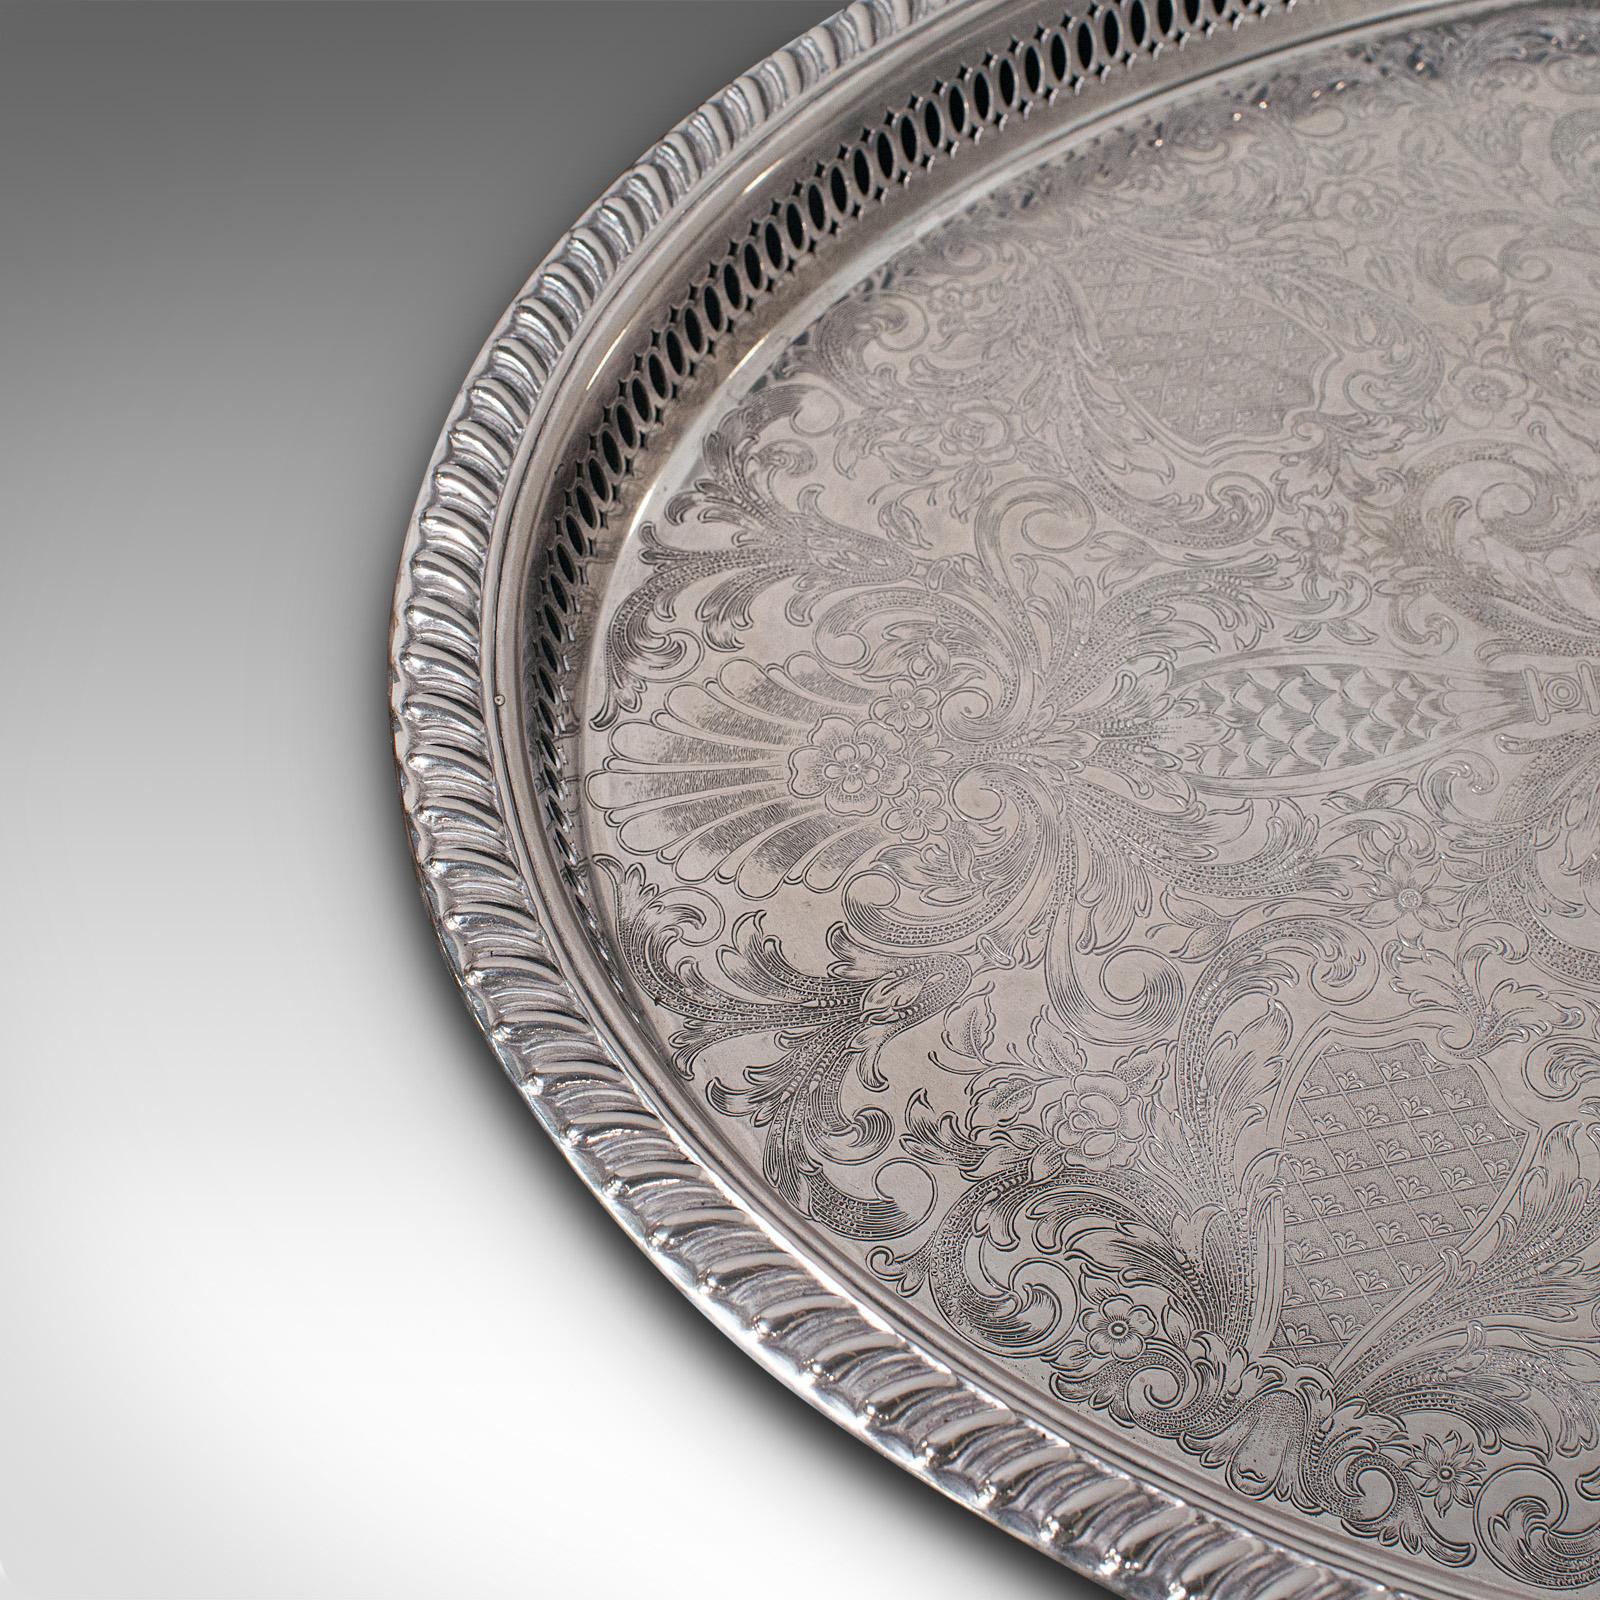 Vintage Oval Serving Tray, English Silver Plate, Afternoon Tea, Decorative, 1950 In Good Condition For Sale In Hele, Devon, GB